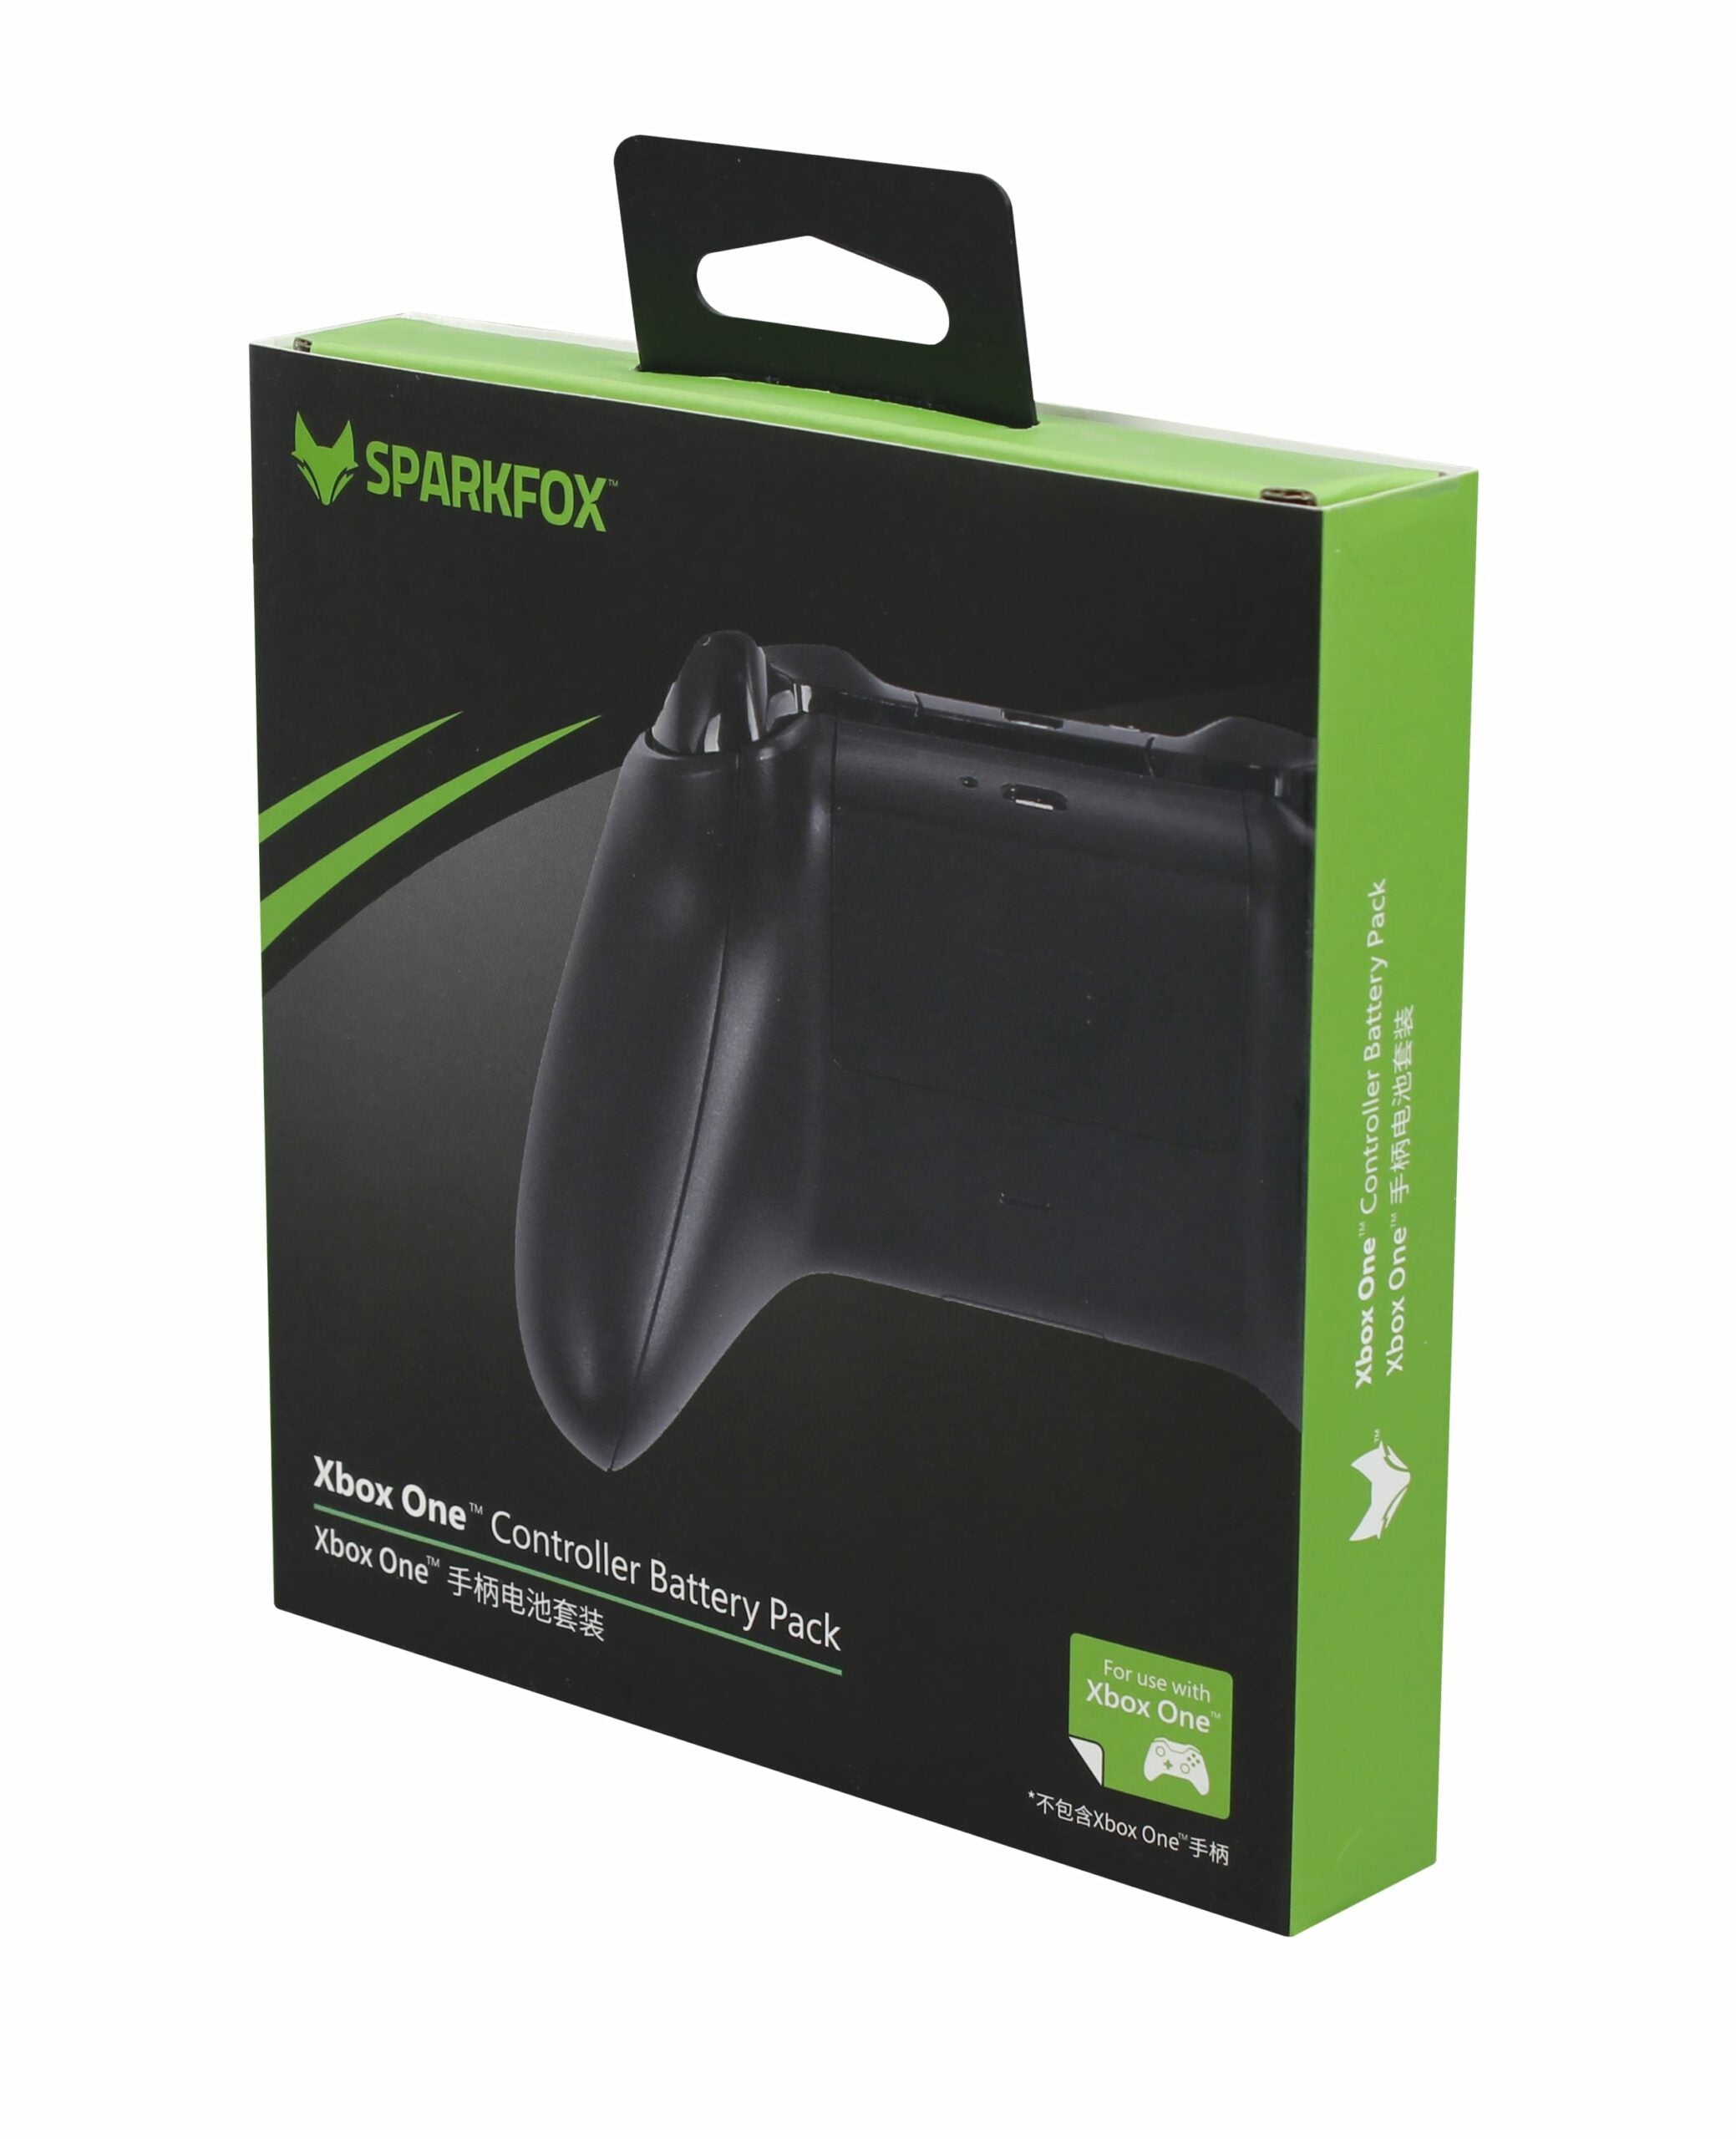 sparkfox-controller-battery-pack-black---xbox-one-2-image